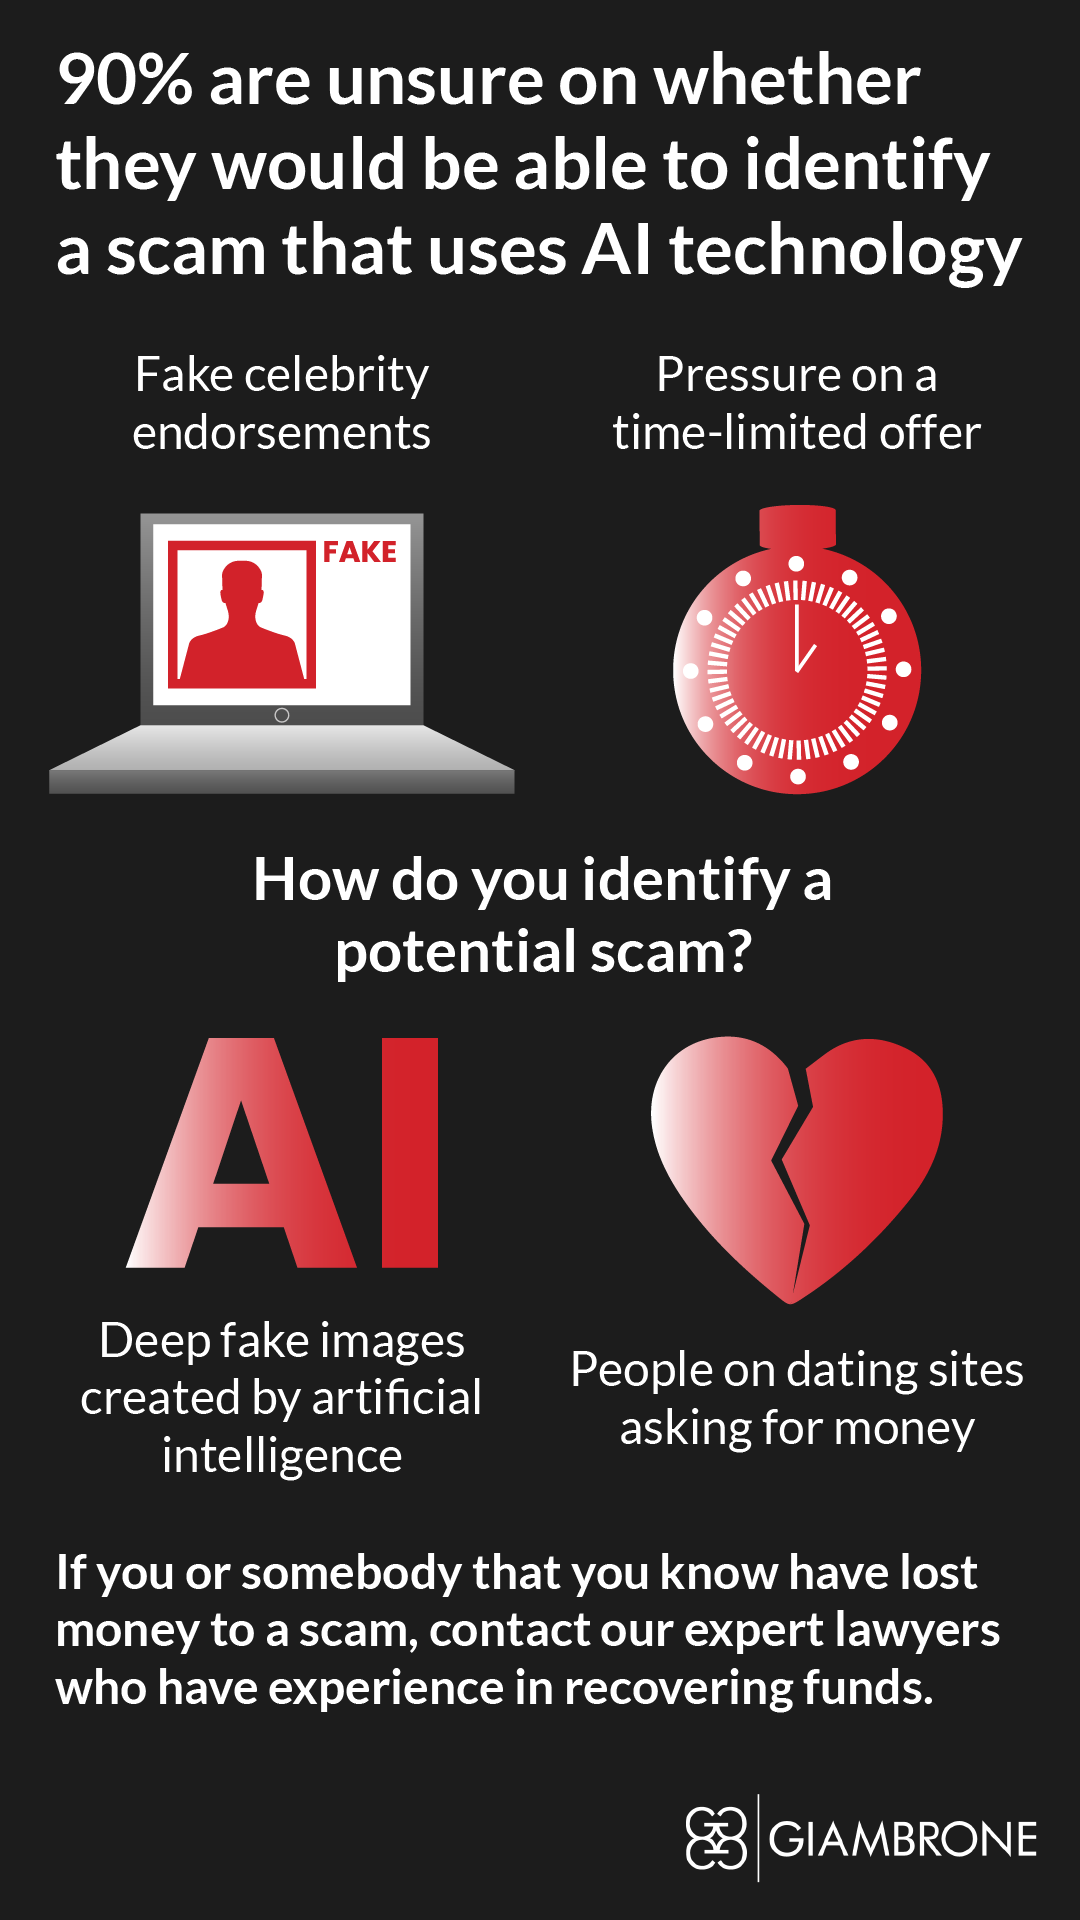 90% of people are unsure on whether they would be able to identify a scam that uses AI technology